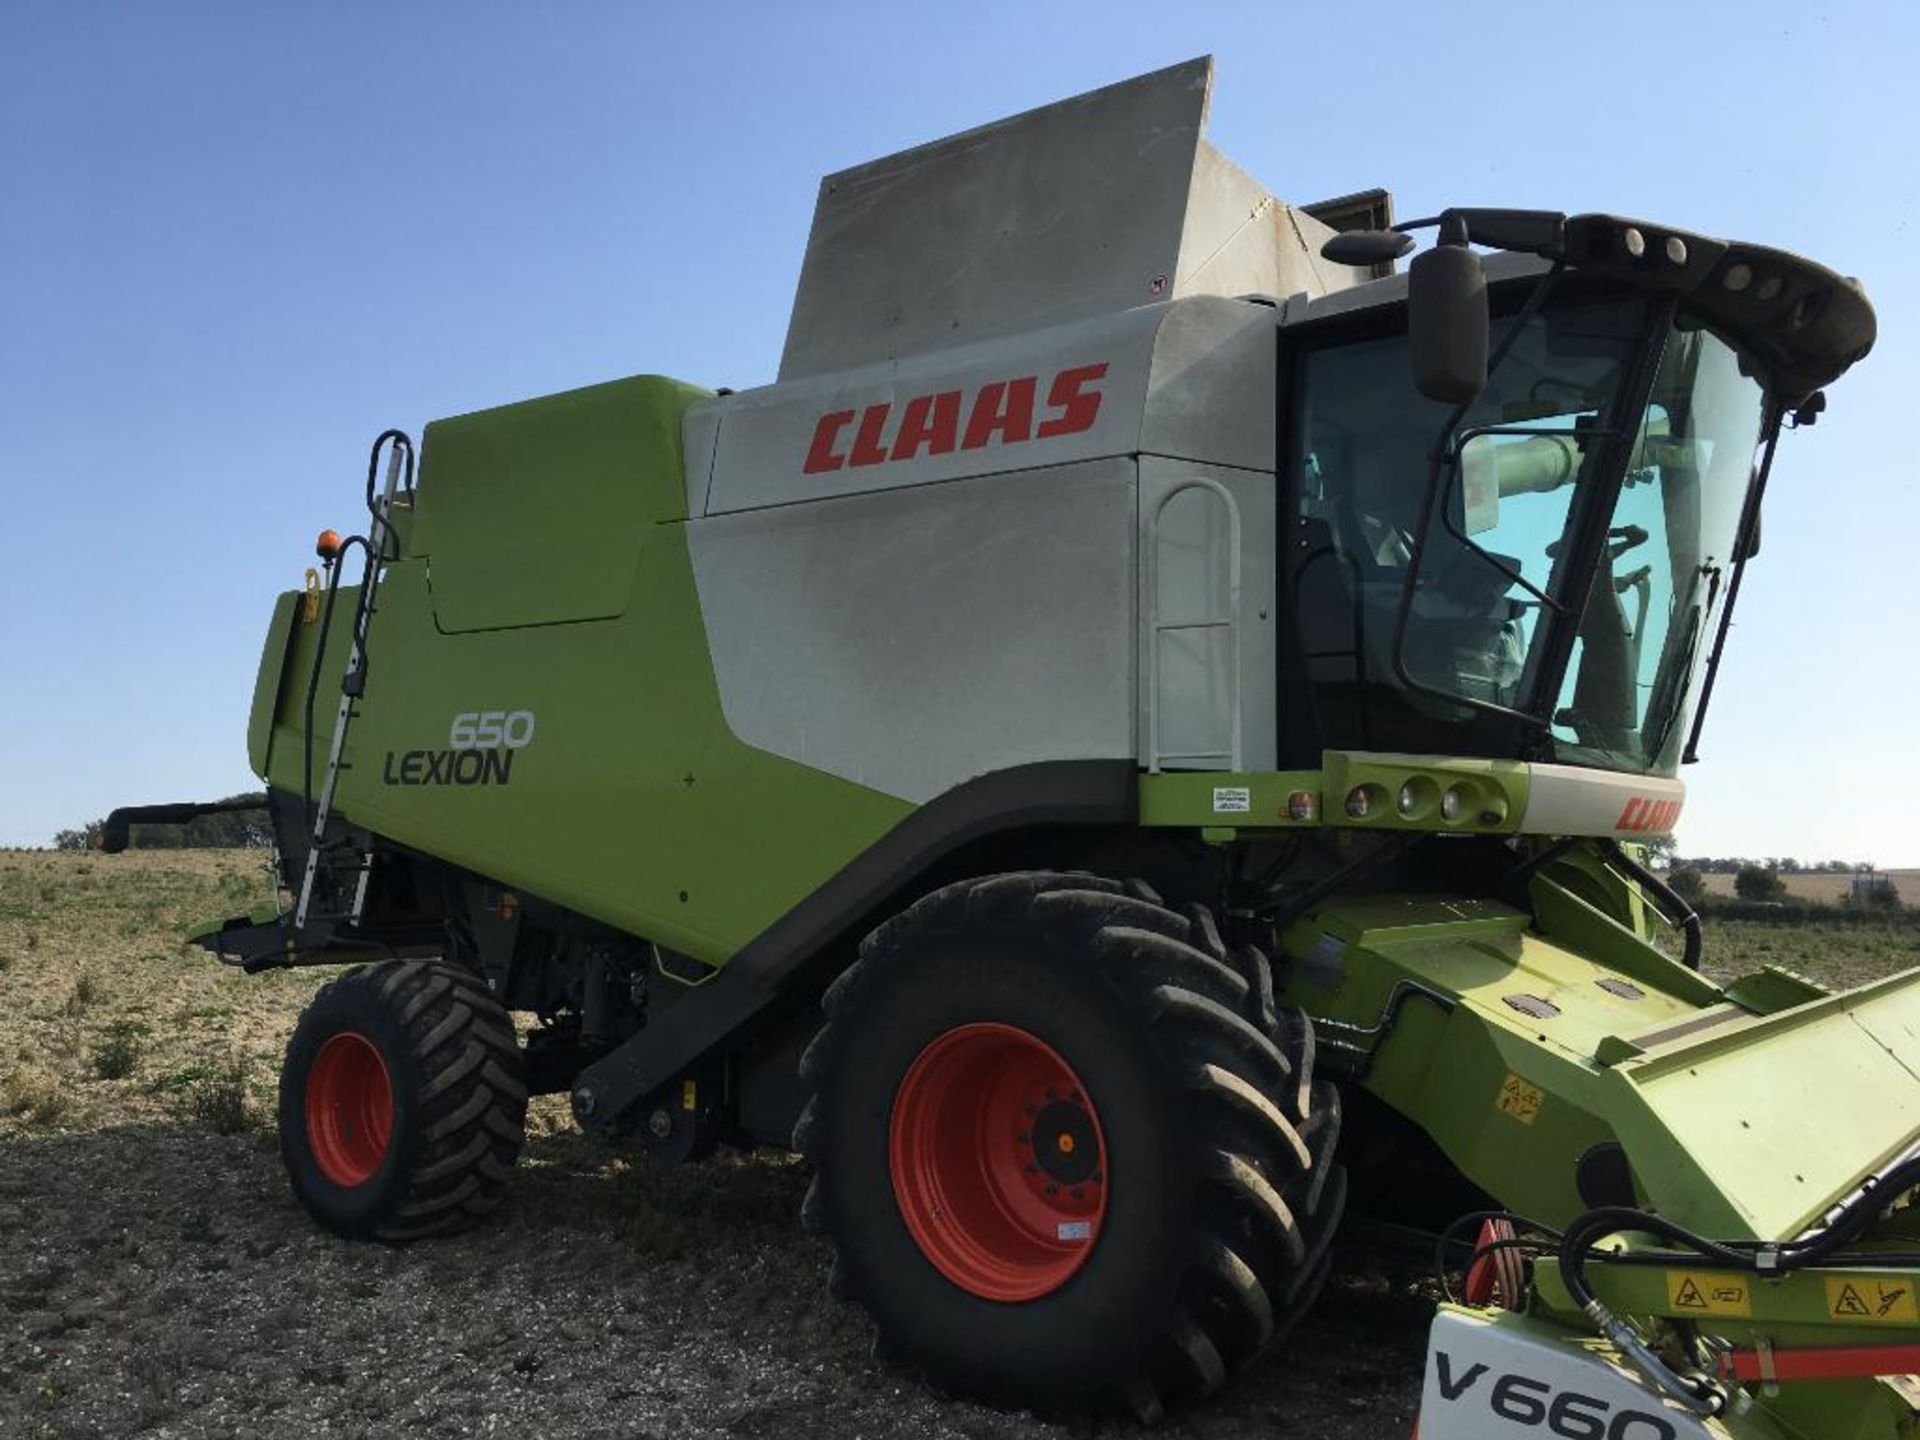 2014 Claas Lexion 650 combine harvester with V660 (22ft) header and header trolley with side knife a - Image 23 of 26